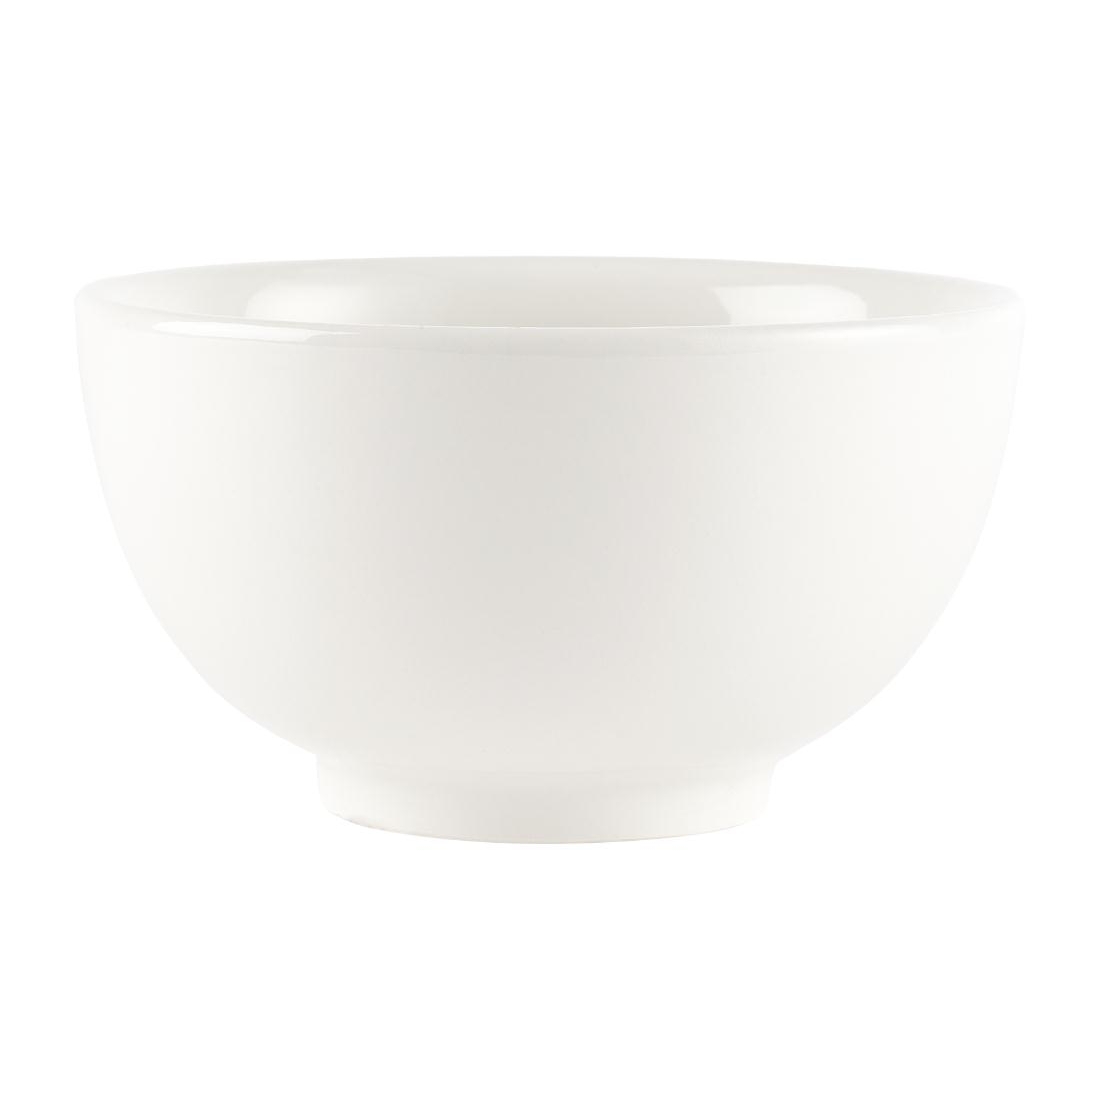 Churchill Plain Whiteware Large Footed Bowls 145mm